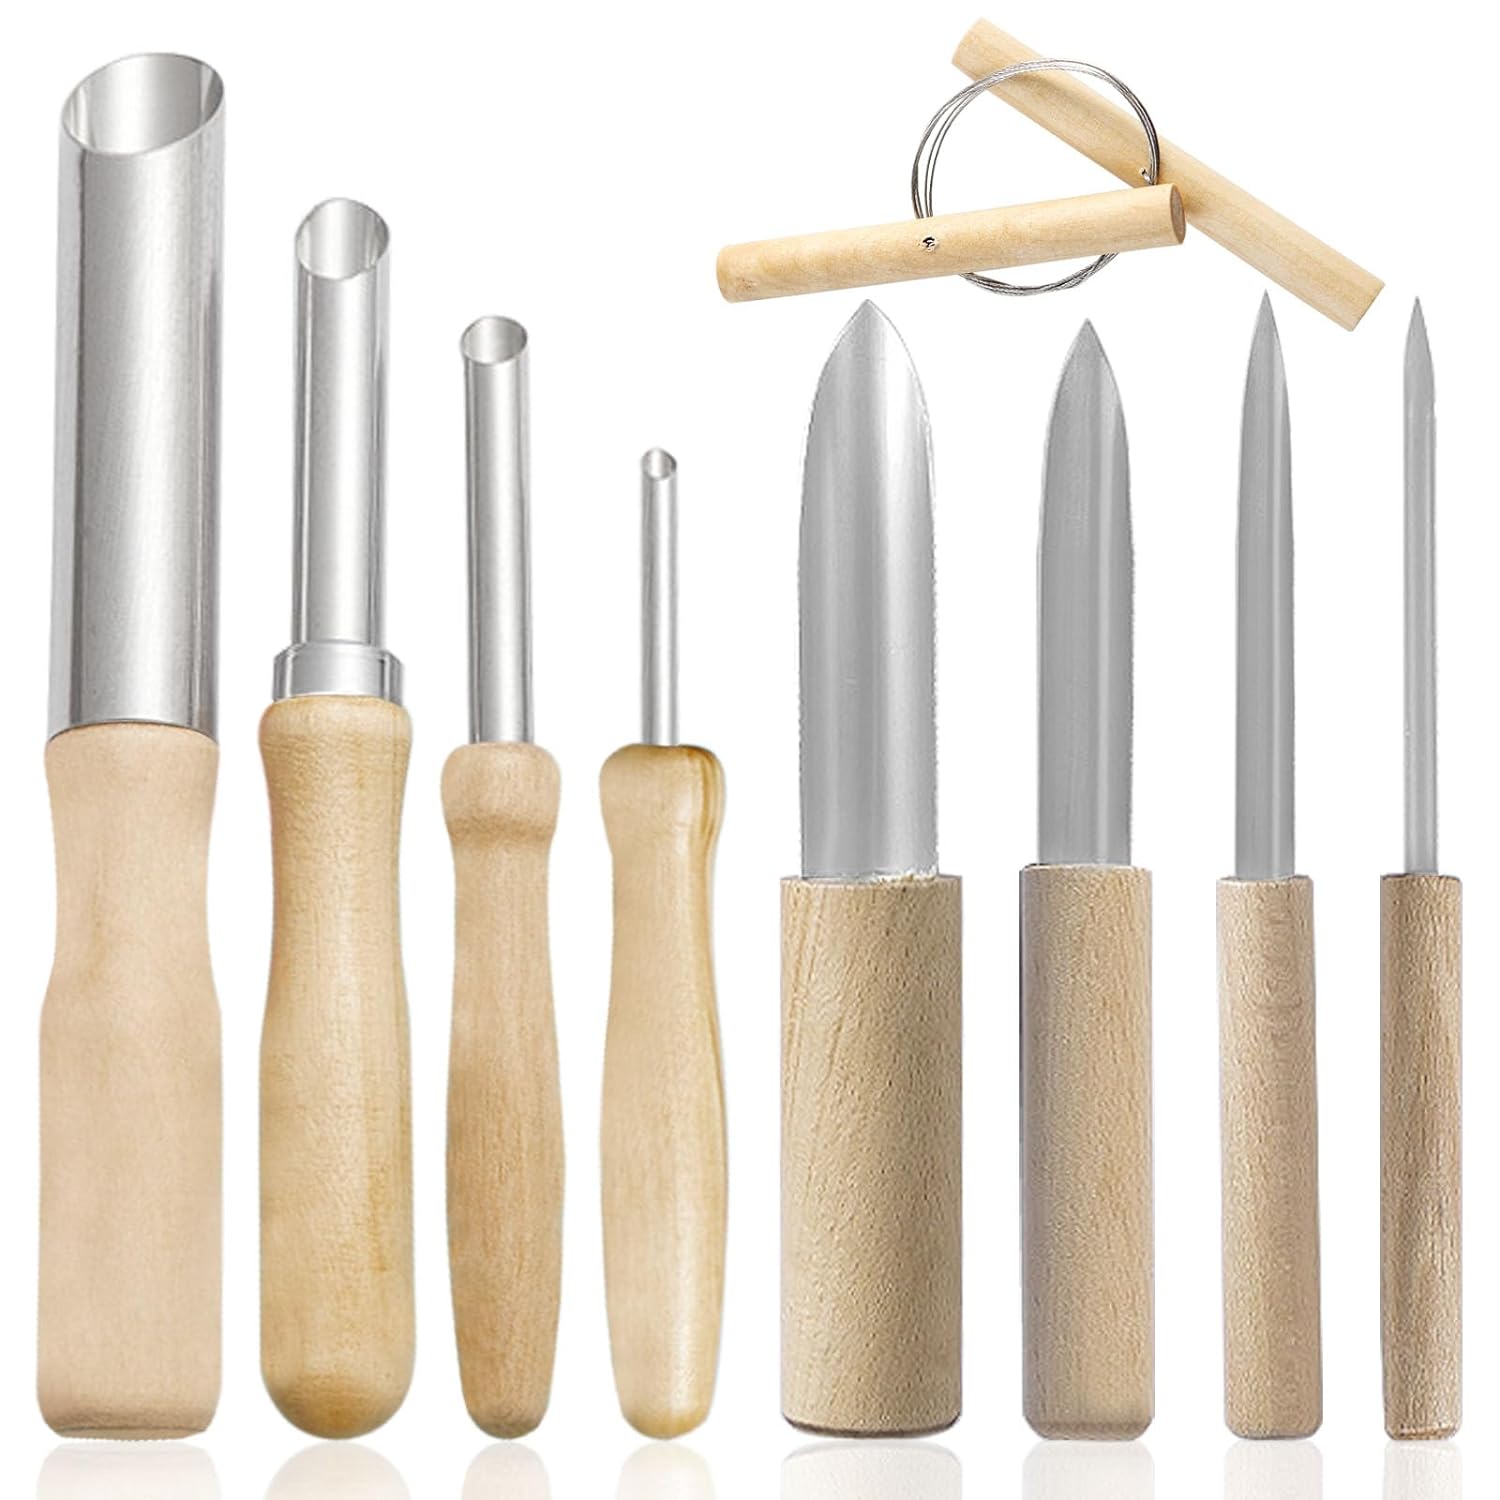 9 Pcs Clay Tools, Sculpting Tools, Clay Wire Cutter, Pottery Tools and Supplies